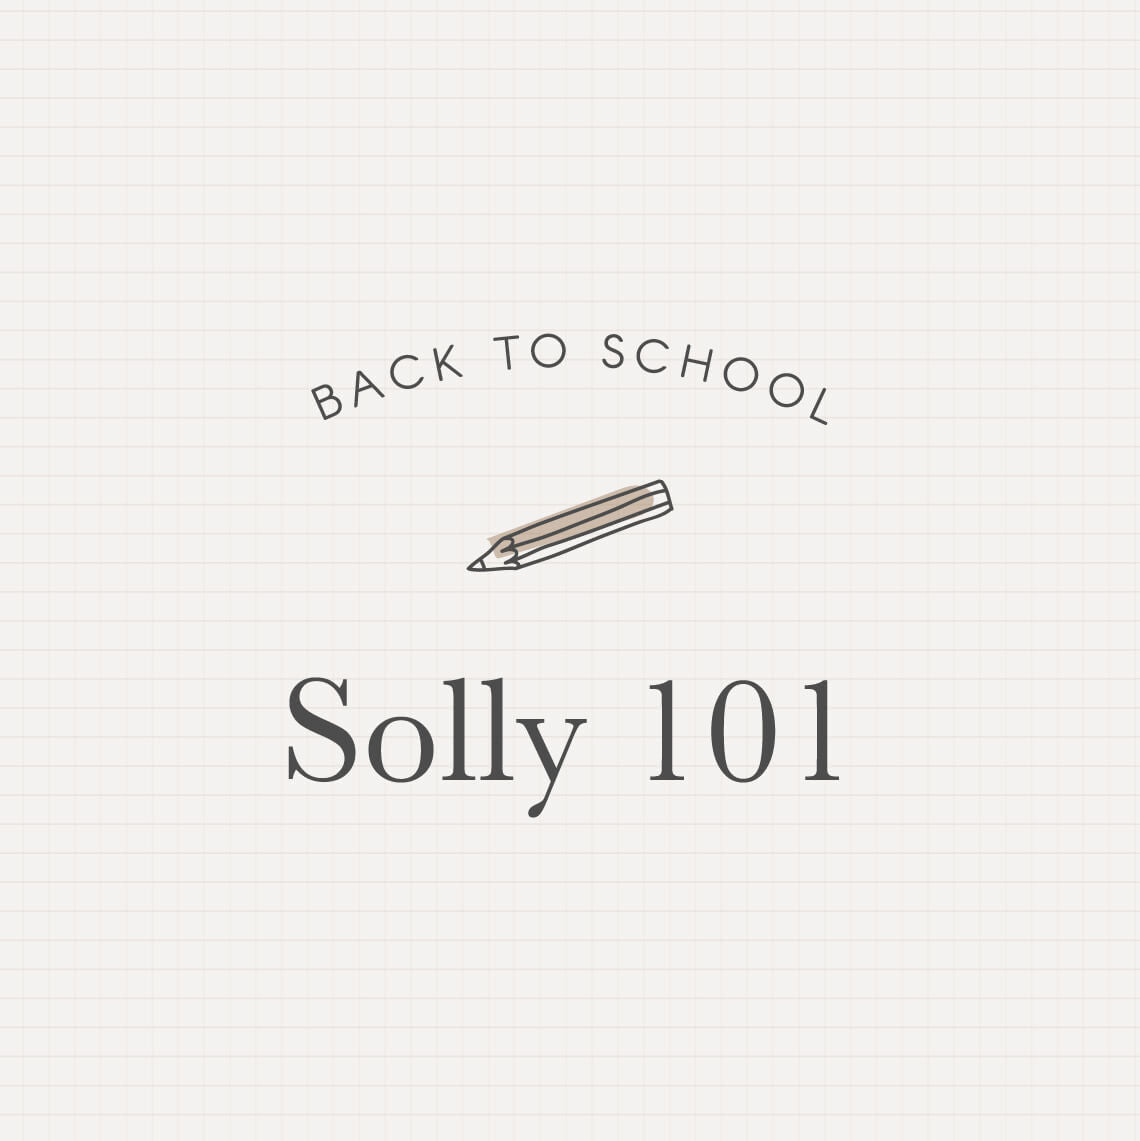 Solly 101